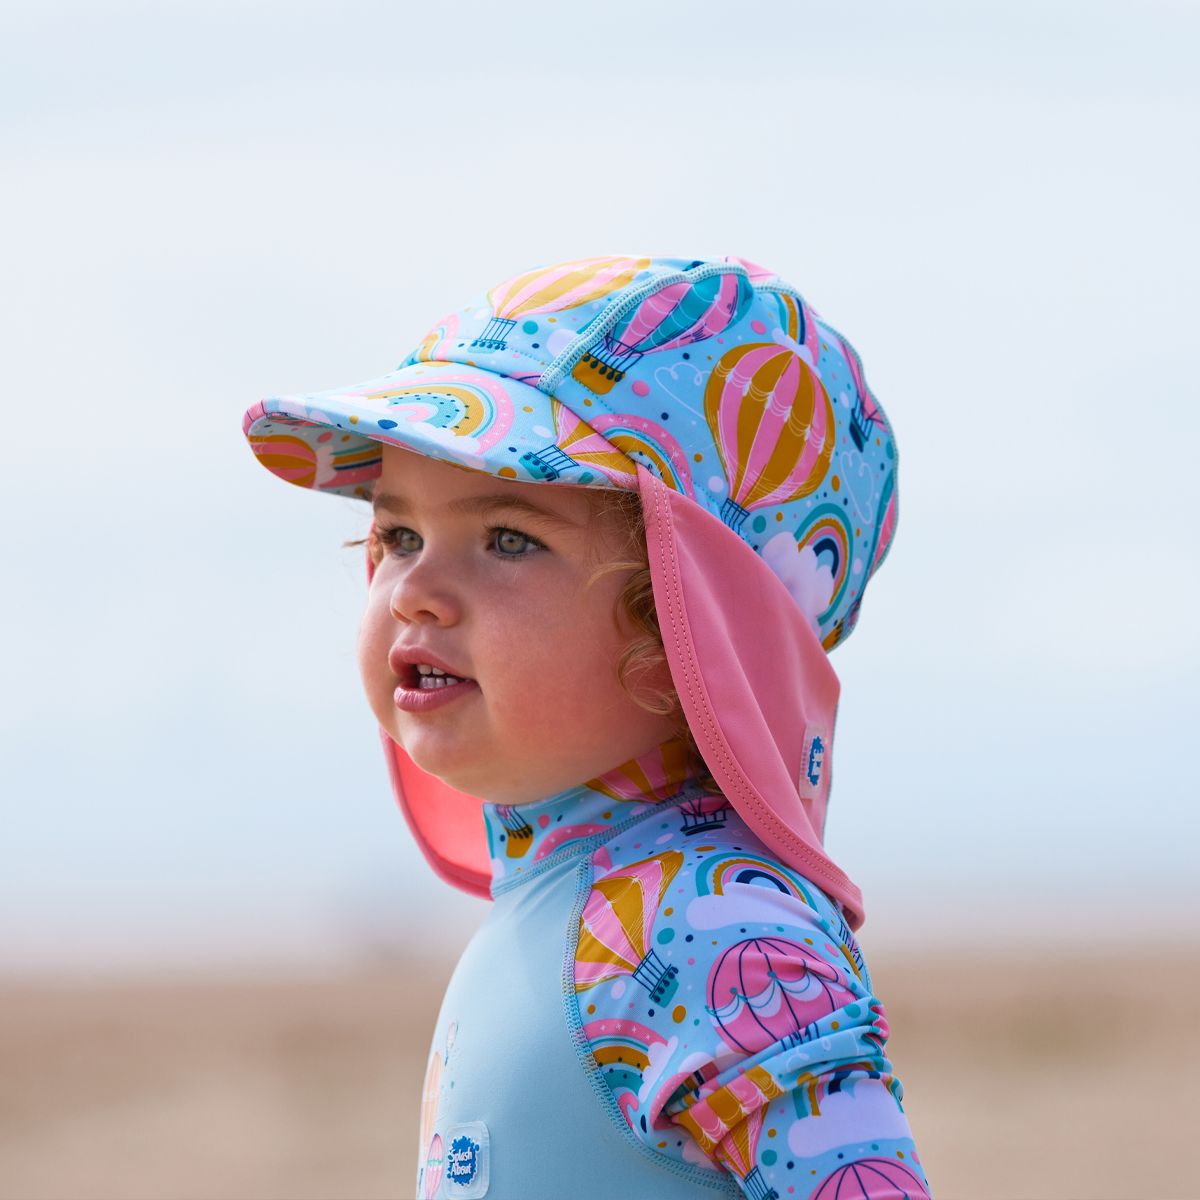 Lifestyle image of toddler wearing a legionnaire style sun hat in baby blue and pink, with hot air balloons themed print panel, including clouds and rainbows. She's also wearing a matching Sun & Sea Wetsuit.